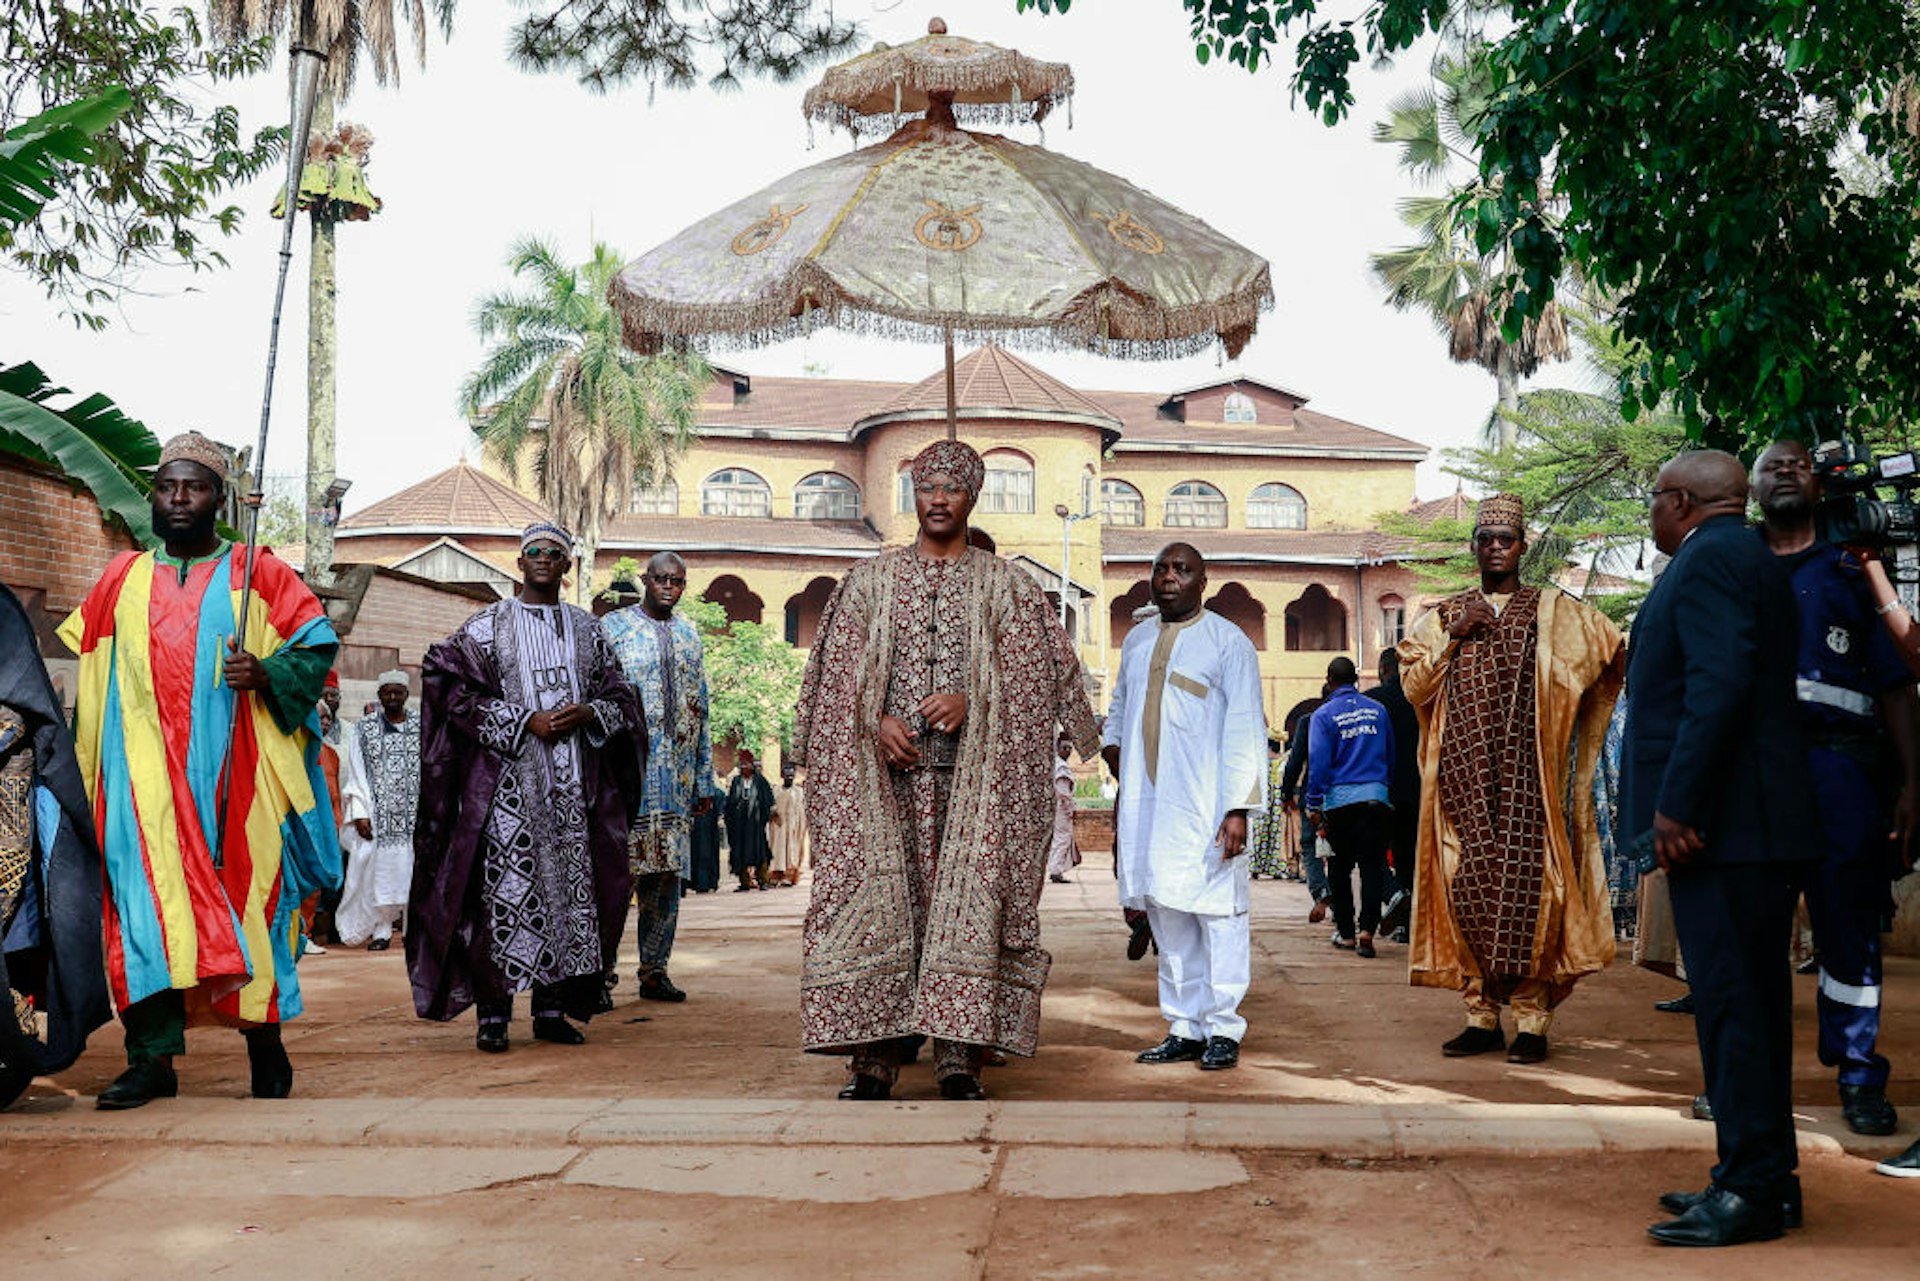 The Sultan King of the Bamouns walks in front of a palace at a ceremony with many men standing around